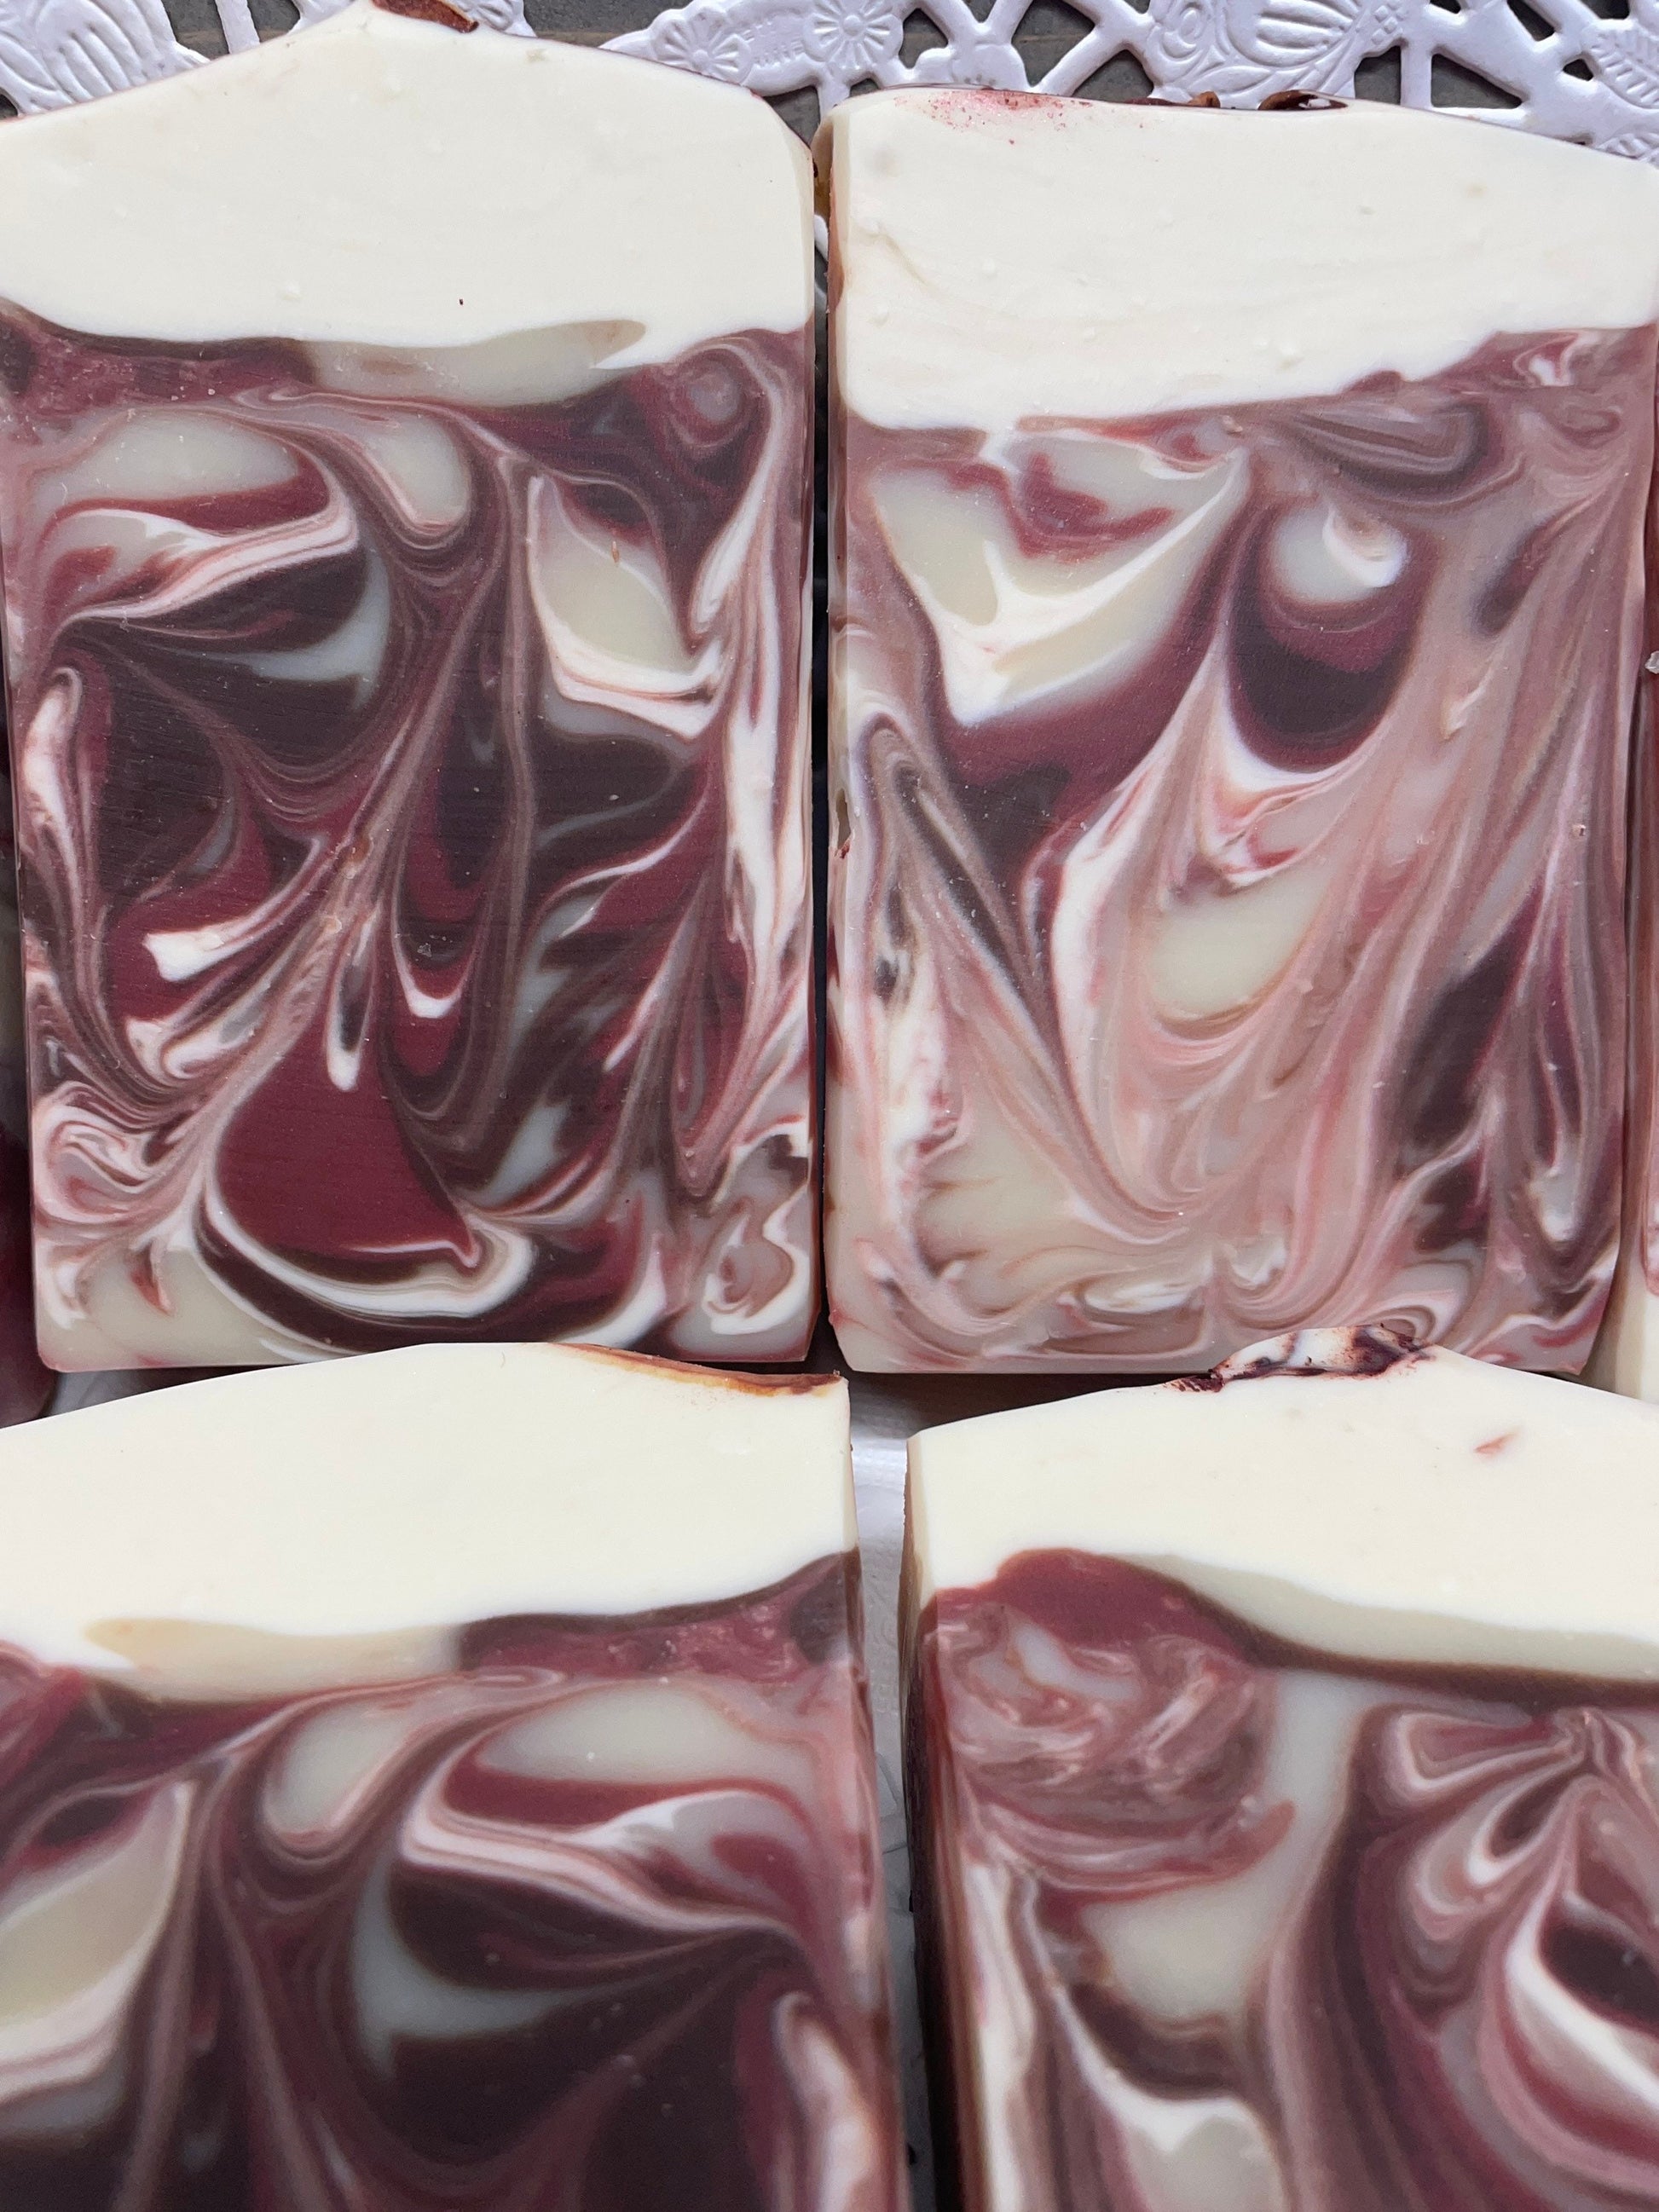 A photo of Apple Dumpling Soap with maroon color and topped in cream color